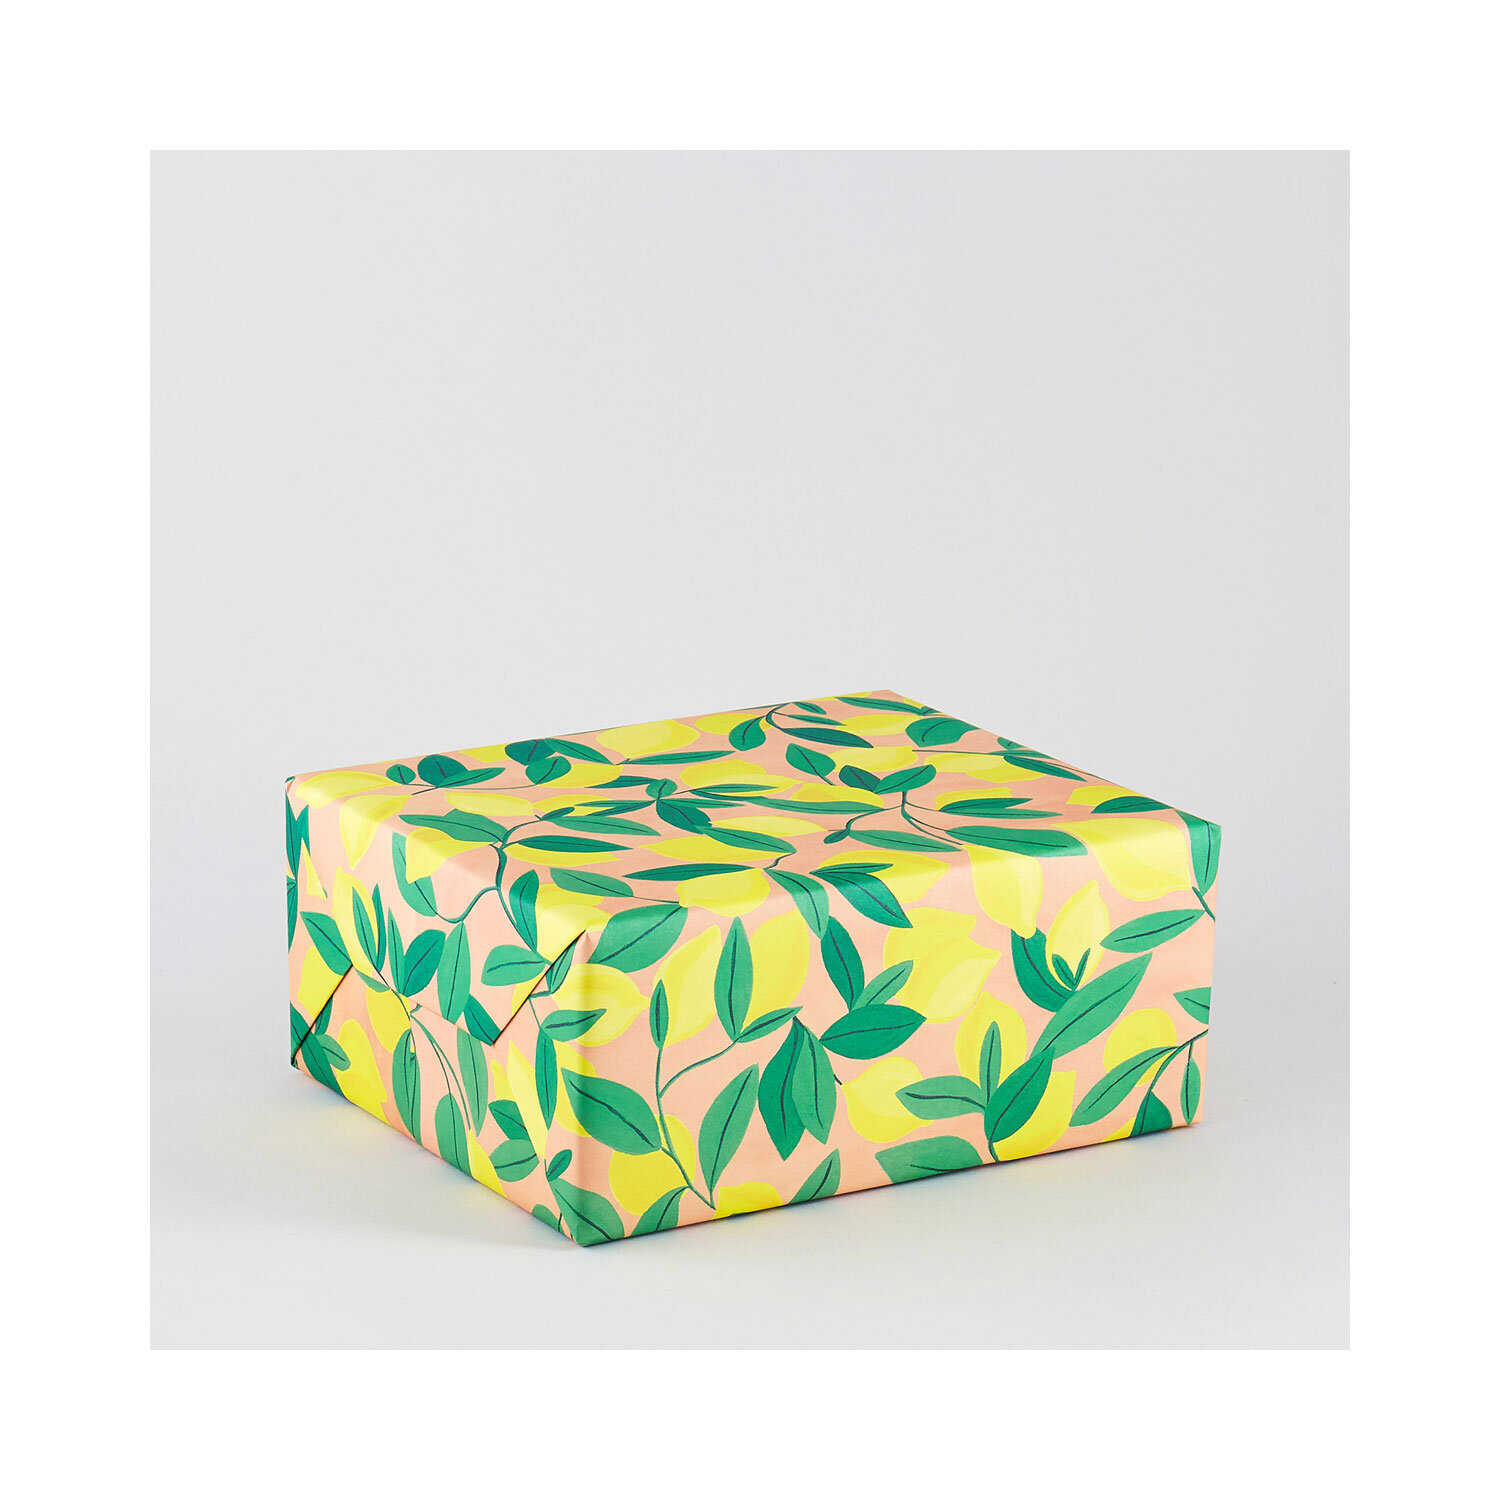 Lemons Wrapping Paper by Wrap x Isabelle Feliu